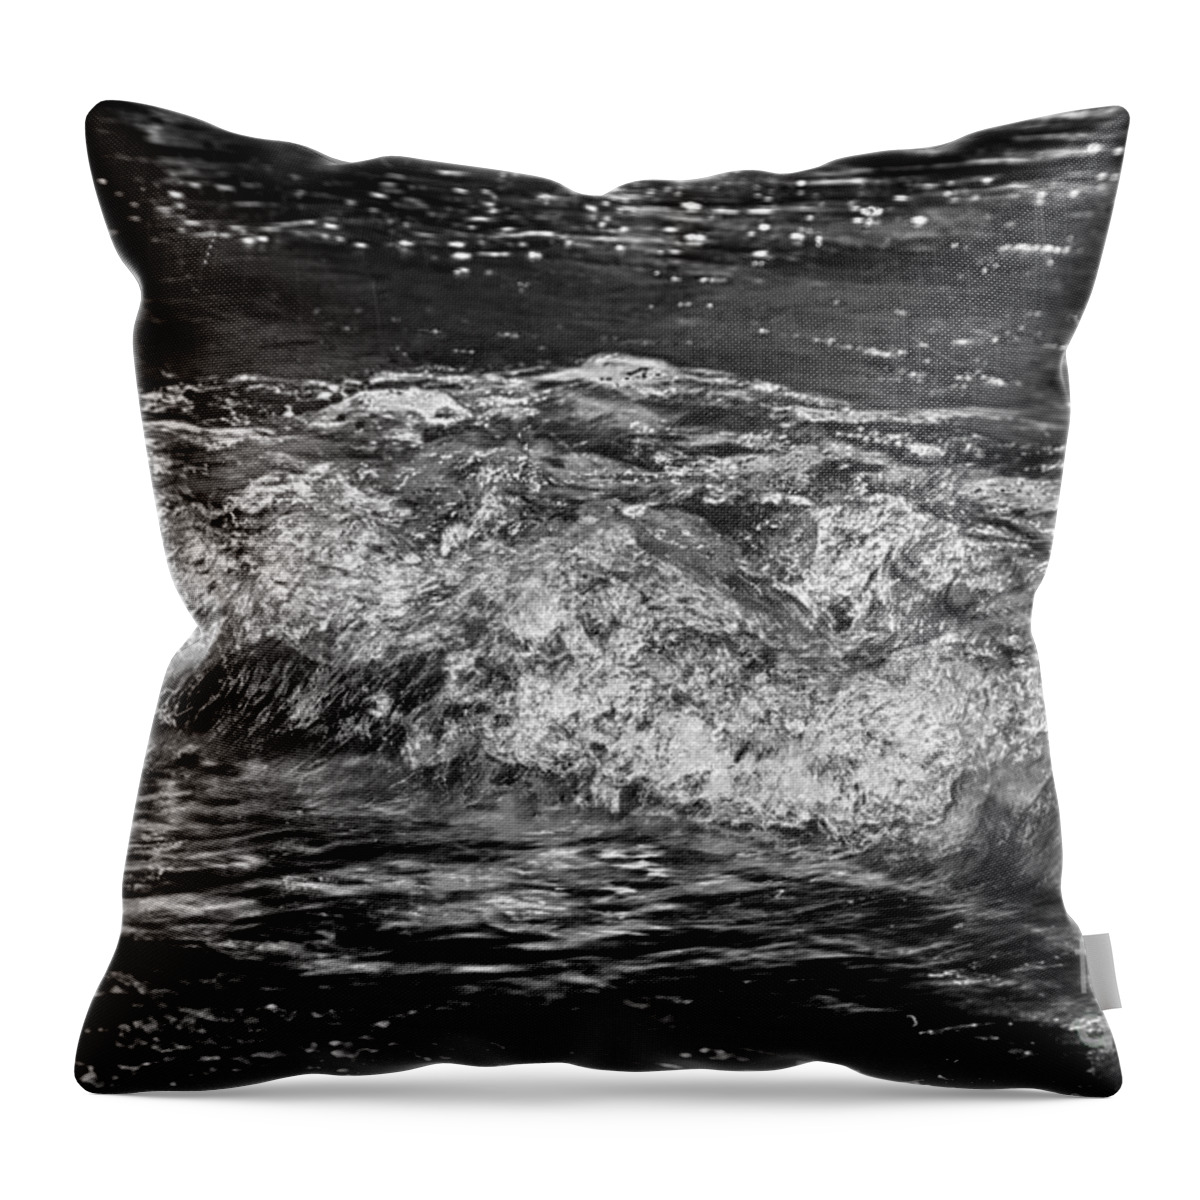 Awosting Falls Throw Pillow featuring the photograph Current by Rick Kuperberg Sr